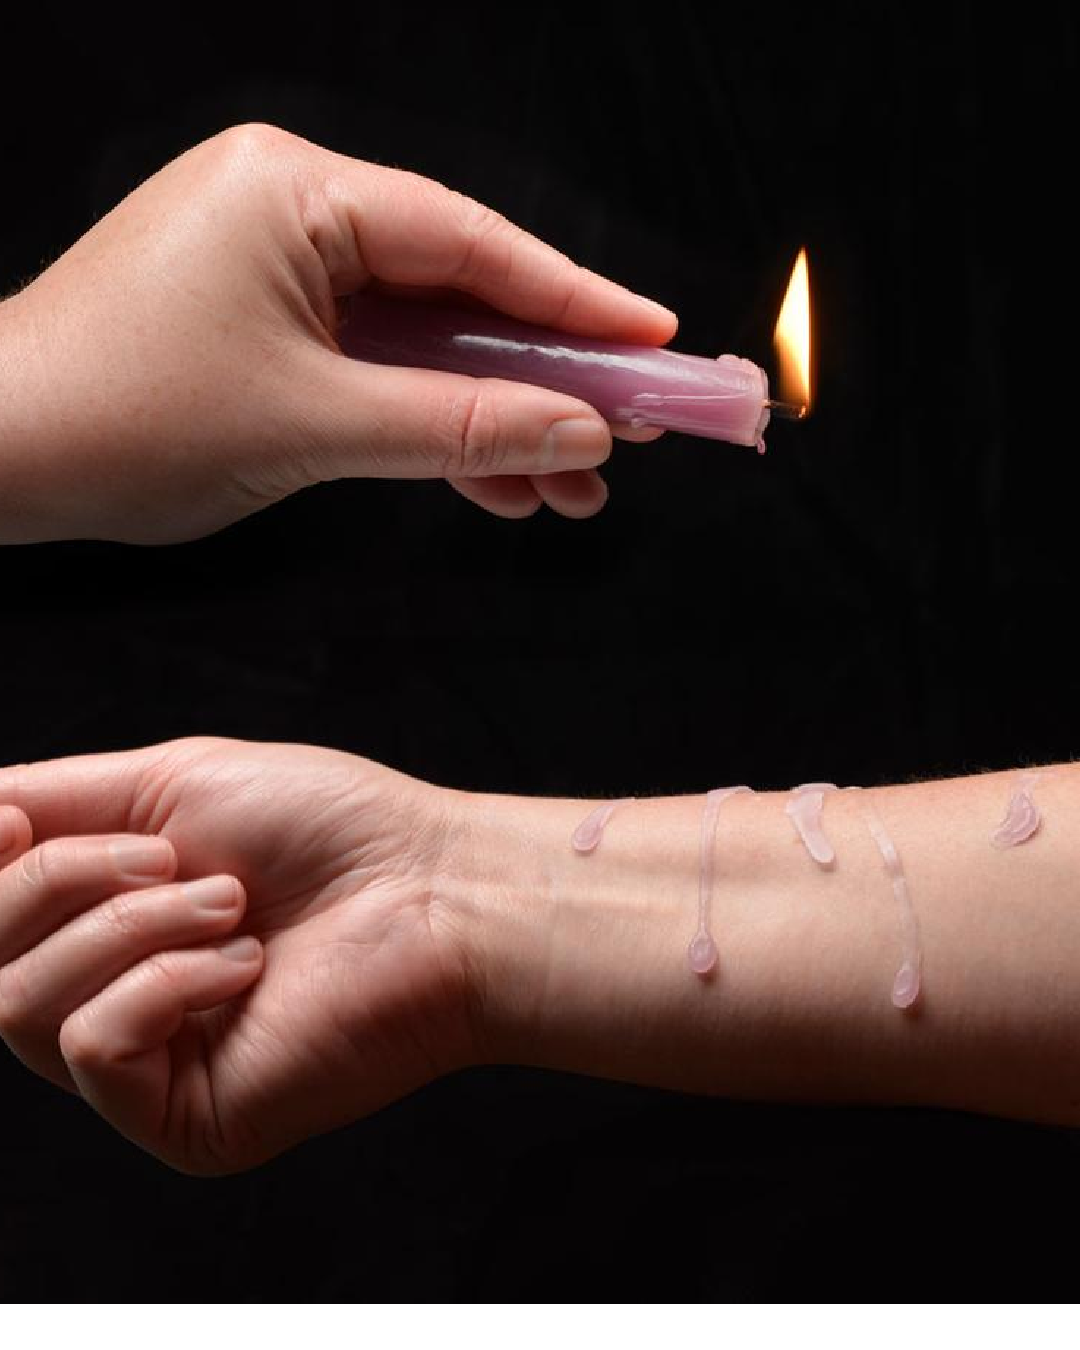 Lacire Drip Pillar Candles - Violet candle being dripped on model's arm 